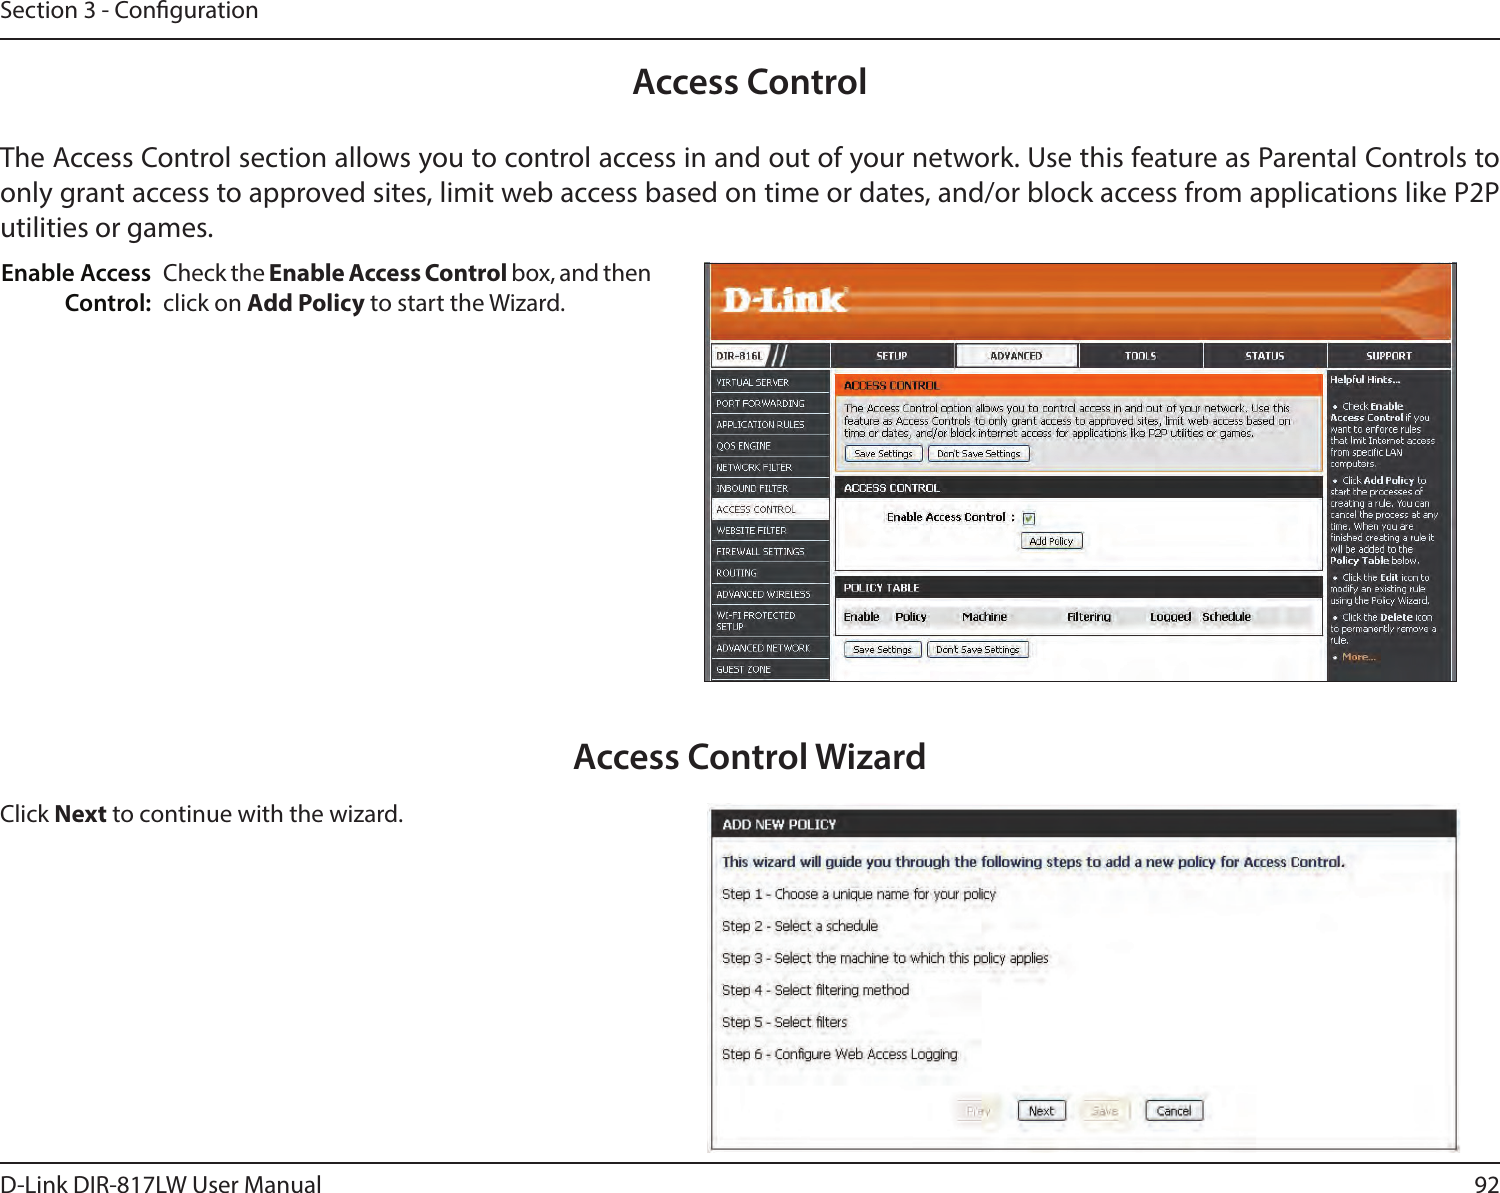 92D-Link DIR-817LW User ManualSection 3 - CongurationAccess ControlCheck the Enable Access Control box, and then click on Add Policy to start the Wizard.Enable Access Control:The Access Control section allows you to control access in and out of your network. Use this feature as Parental Controls to only grant access to approved sites, limit web access based on time or dates, and/or block access from applications like P2P utilities or games.Click Next to continue with the wizard.Access Control Wizard